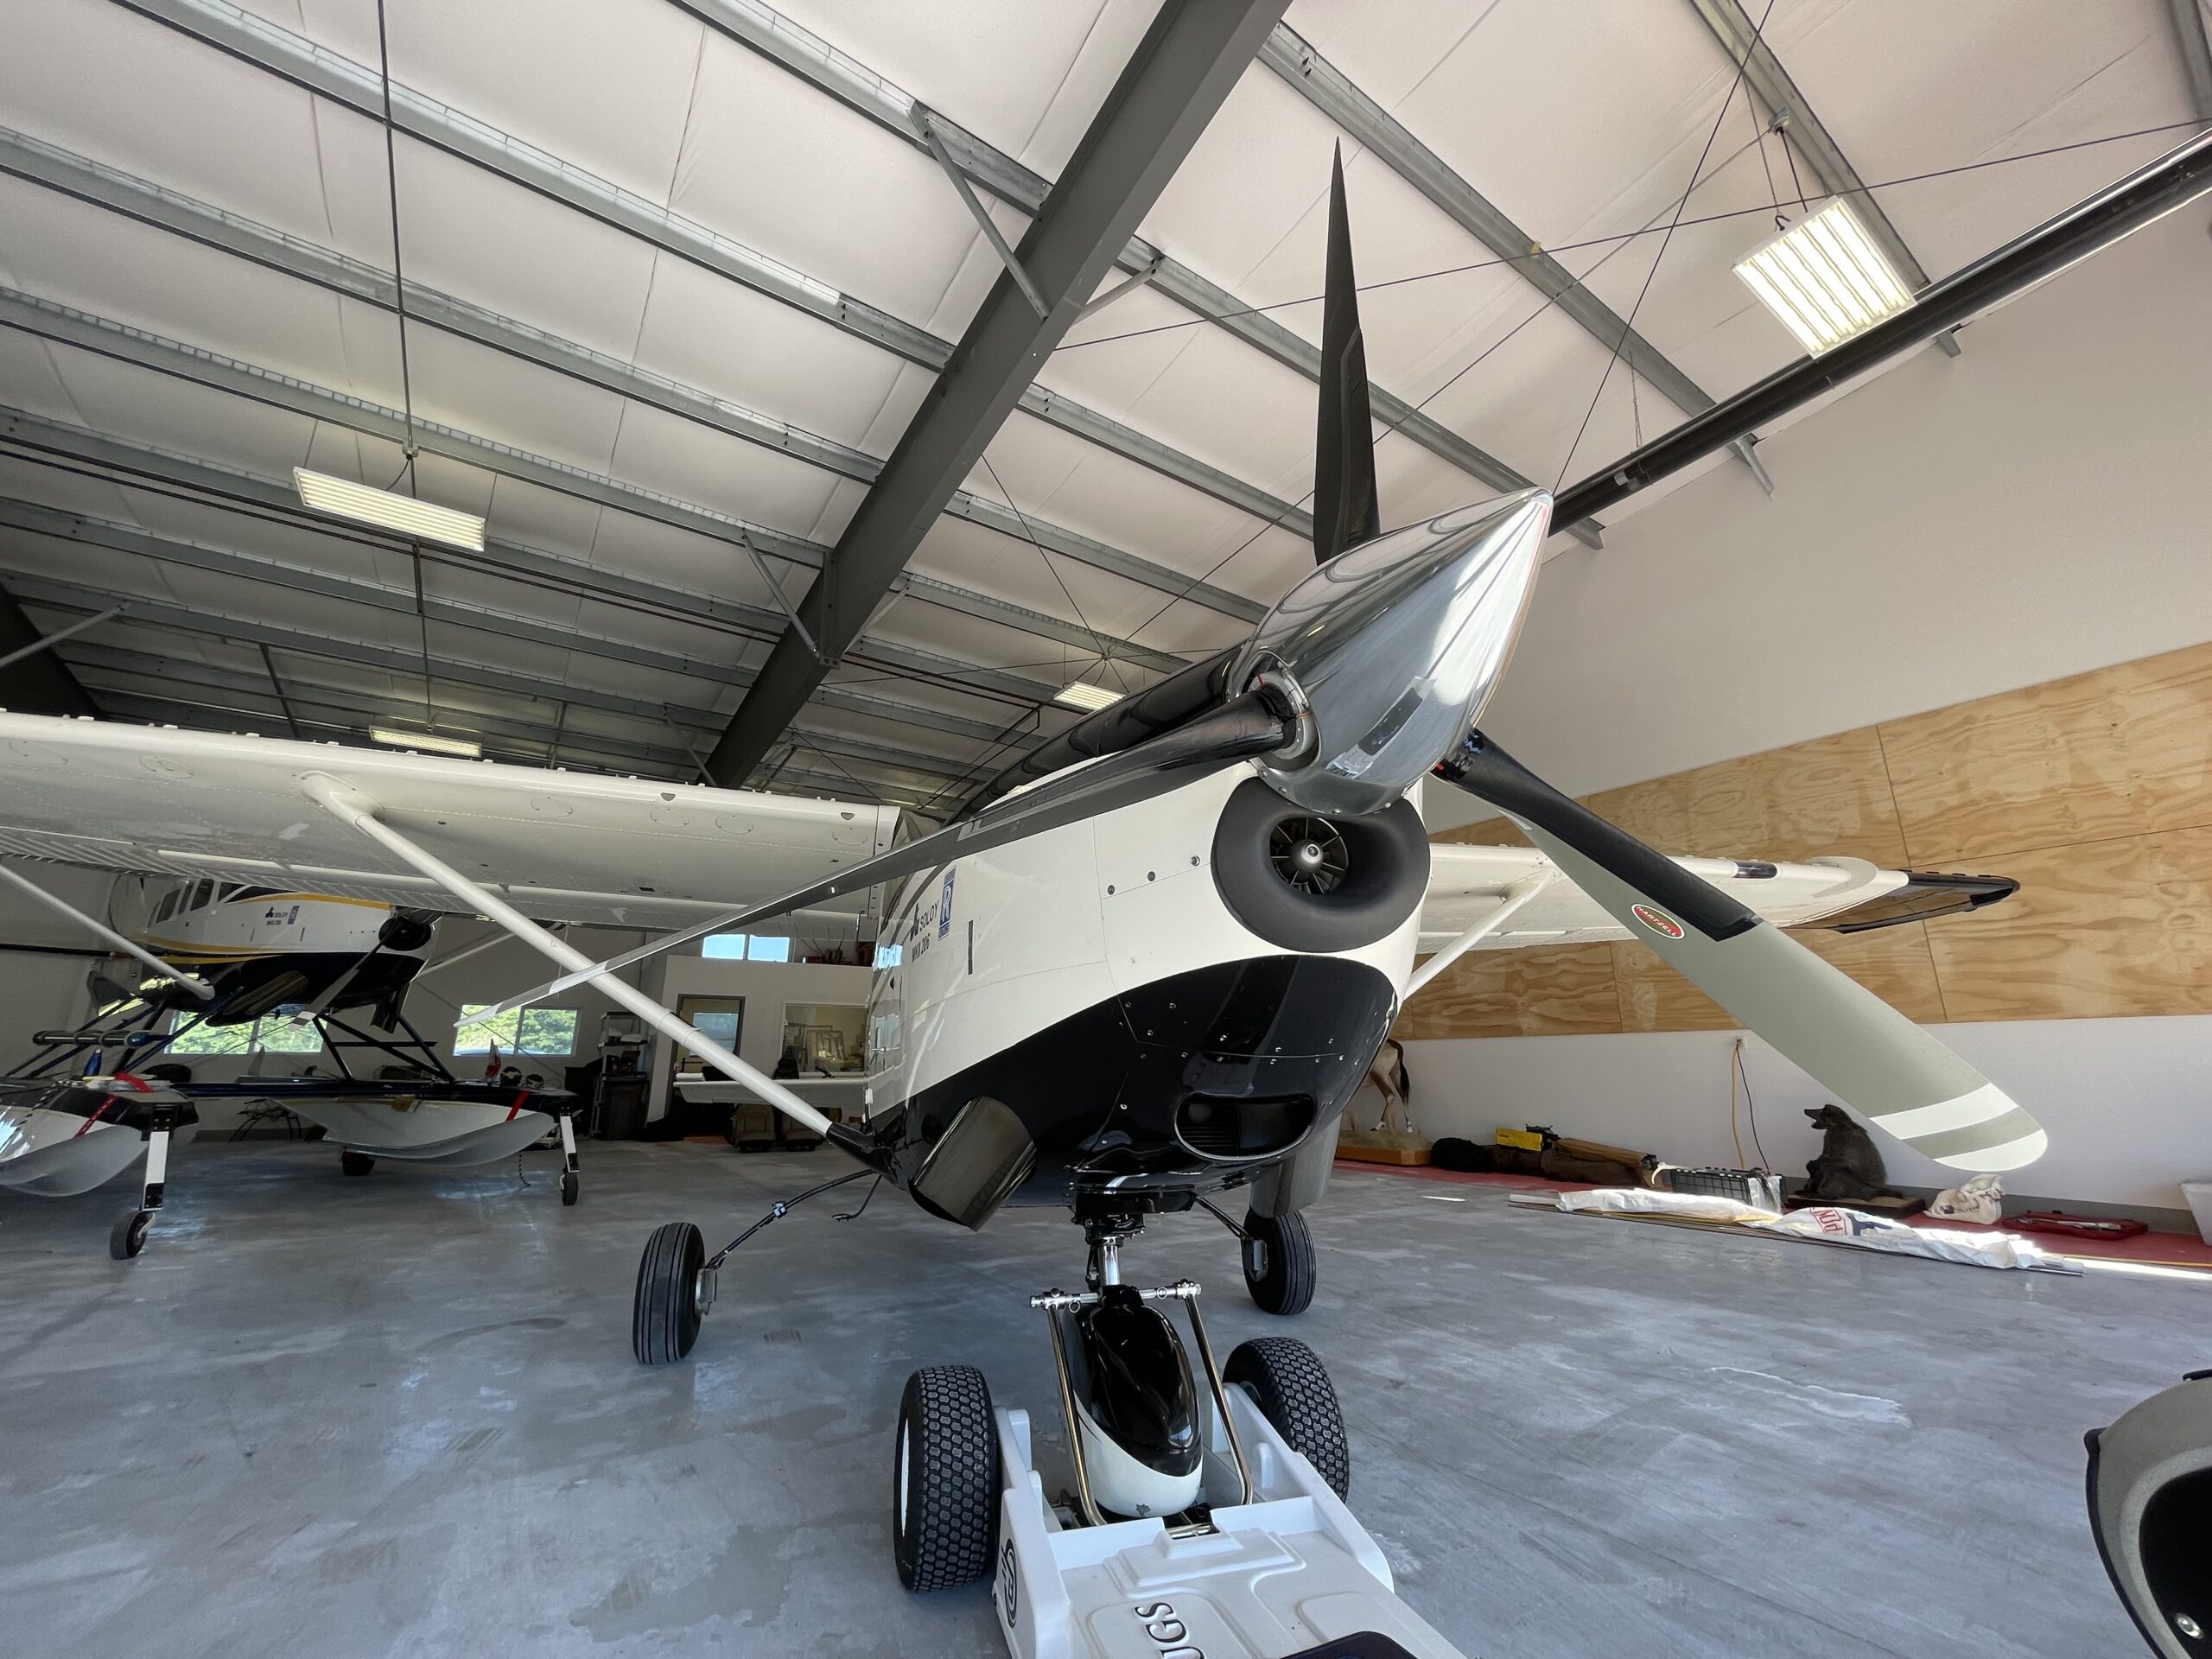 SOLD! Soloy MK II Turbine Cessna 206 | Elevated Aircraft